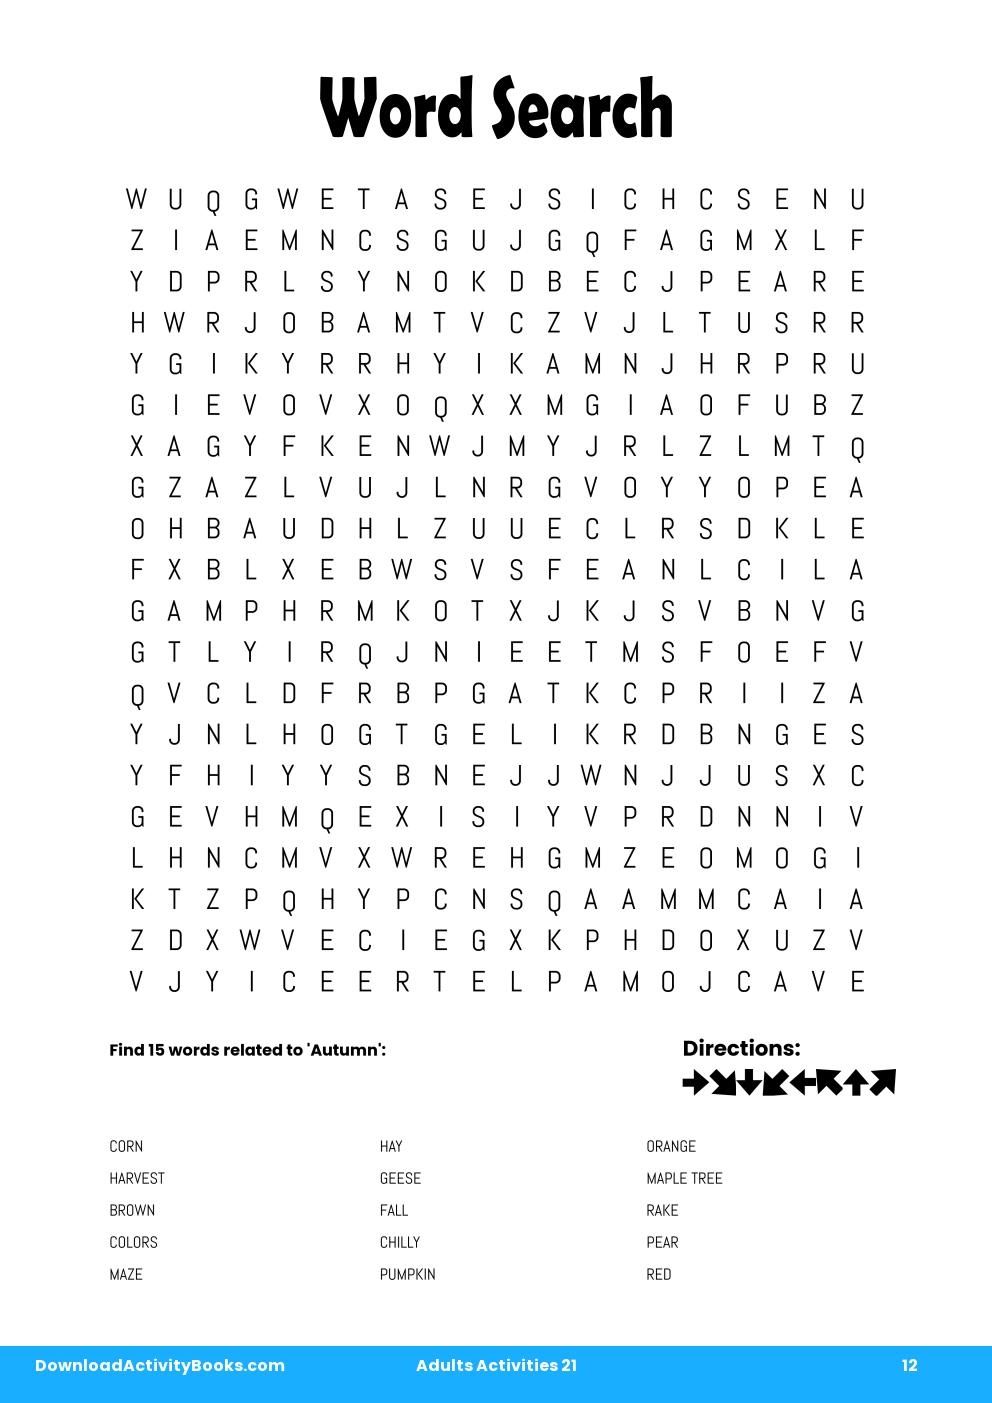 Word Search in Adults Activities 21